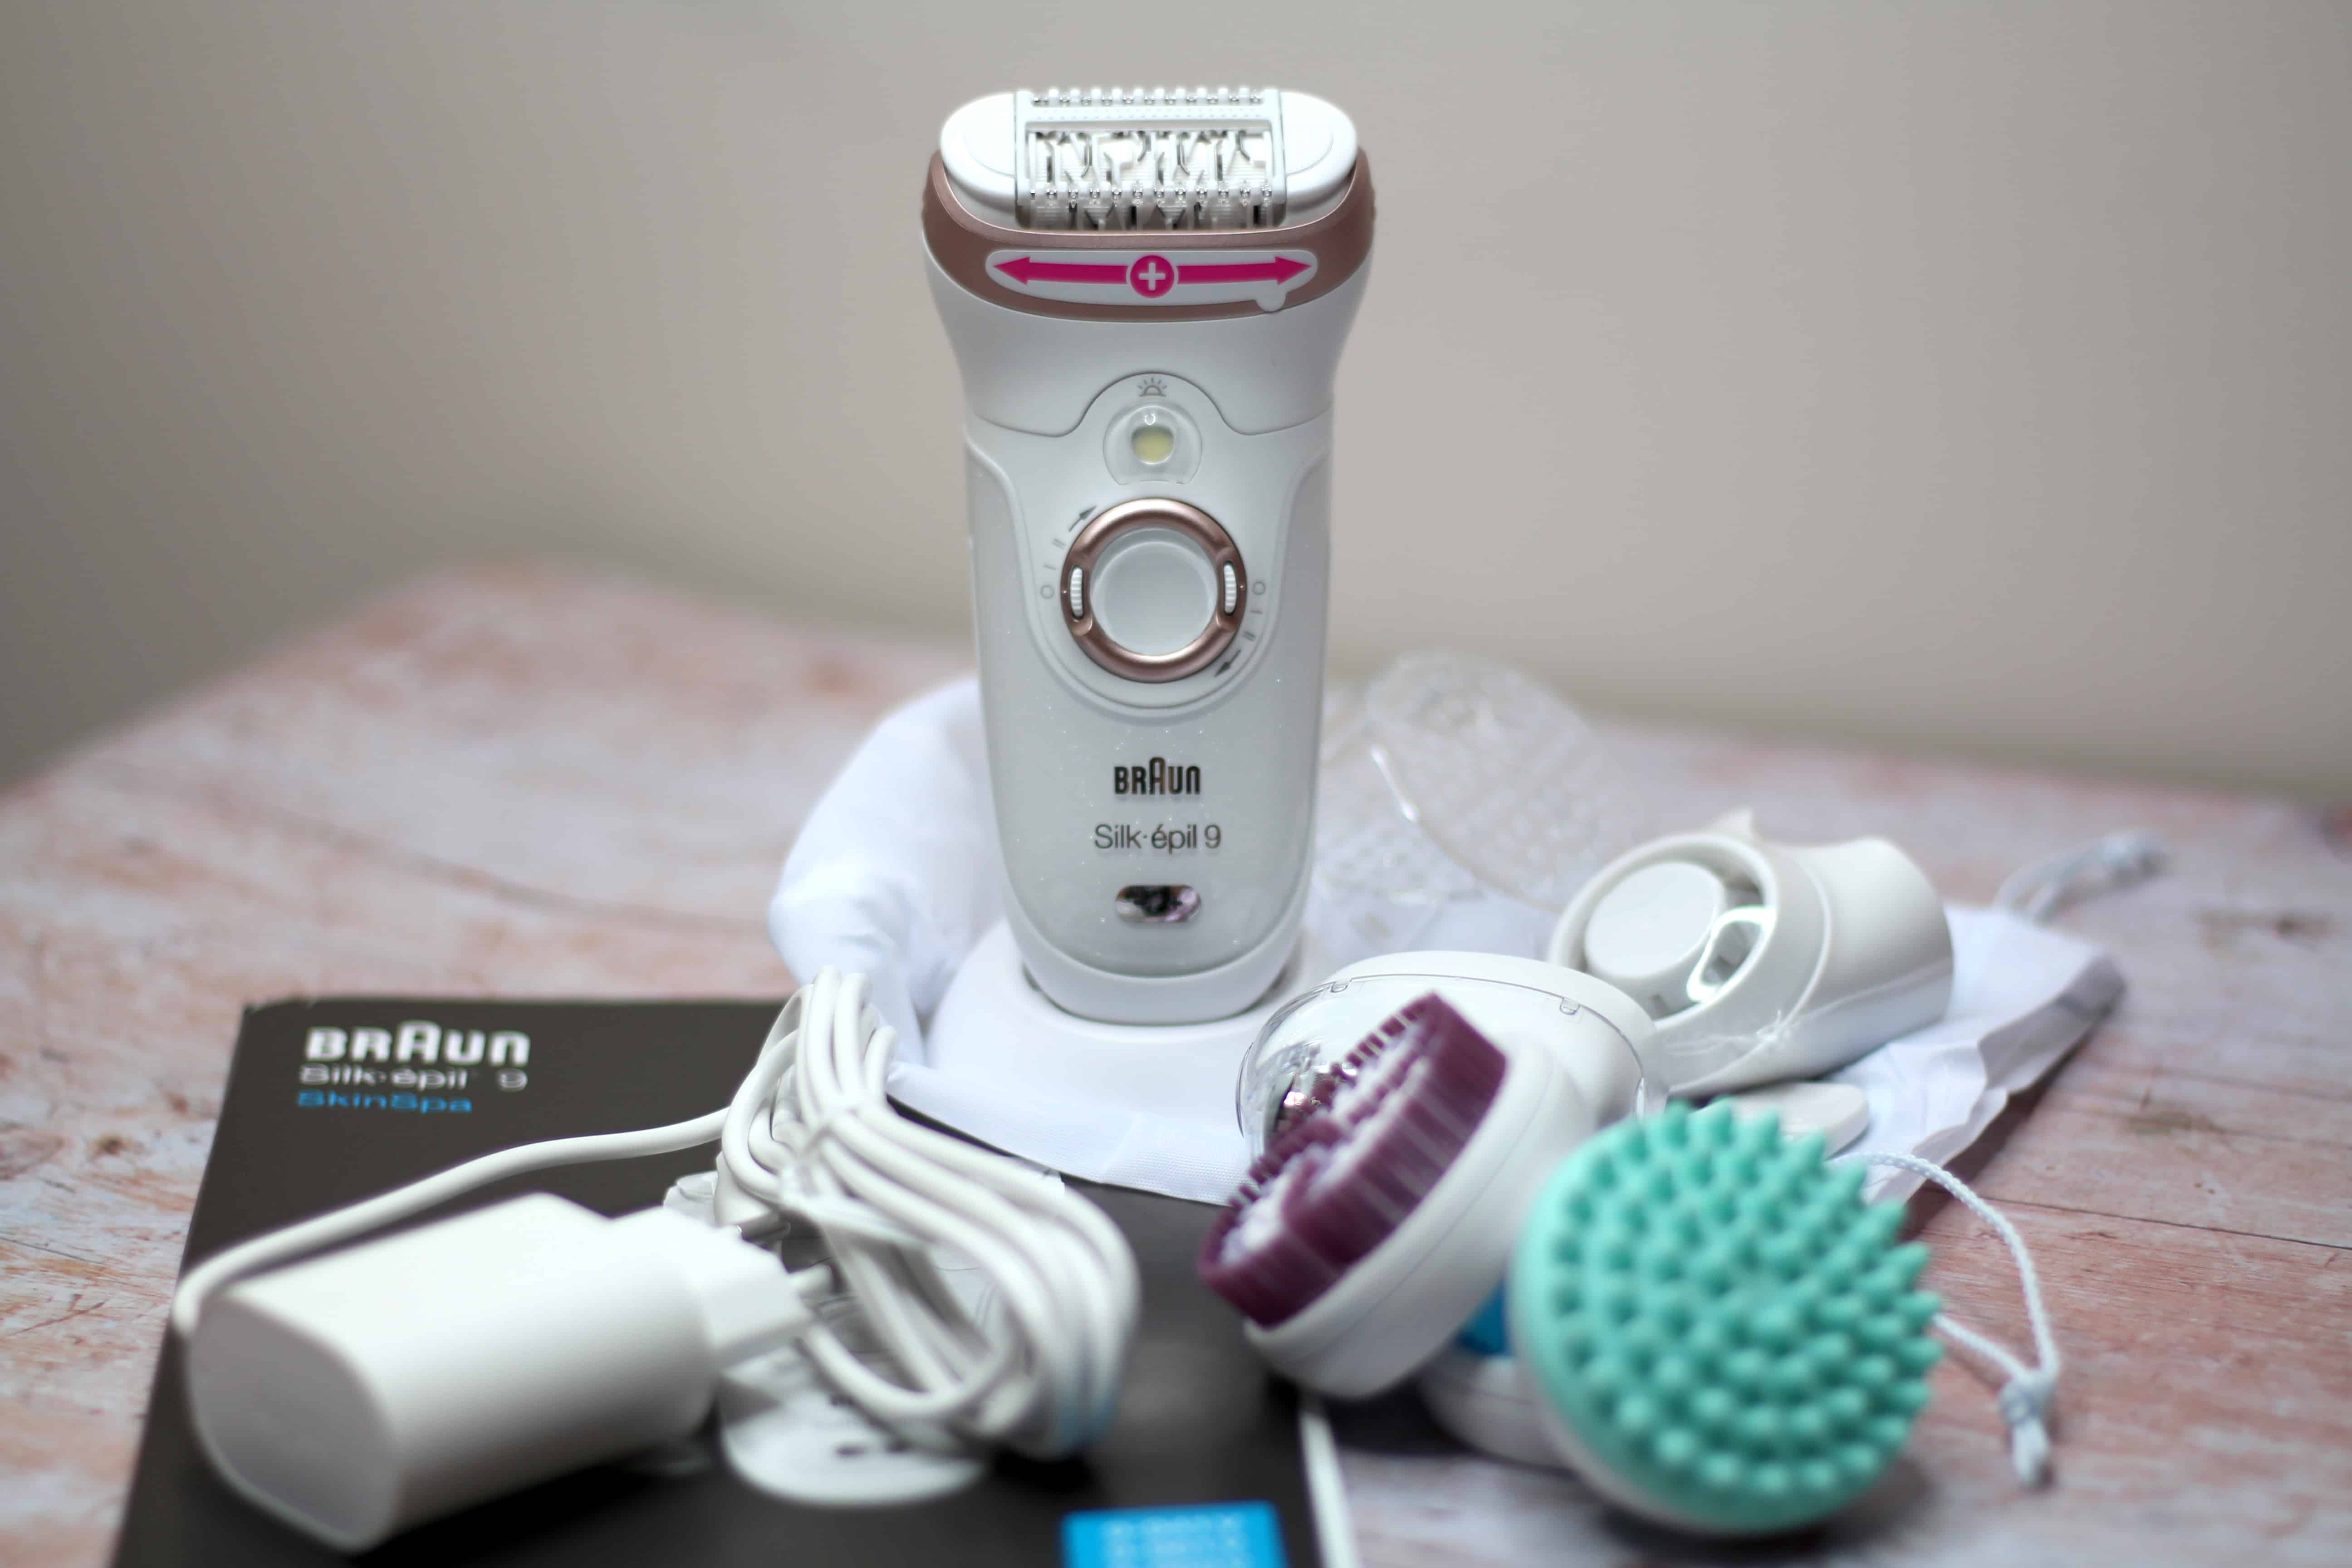 Braun Silk-épil 9 - Review - What Did I Think? - Soph-obsessed